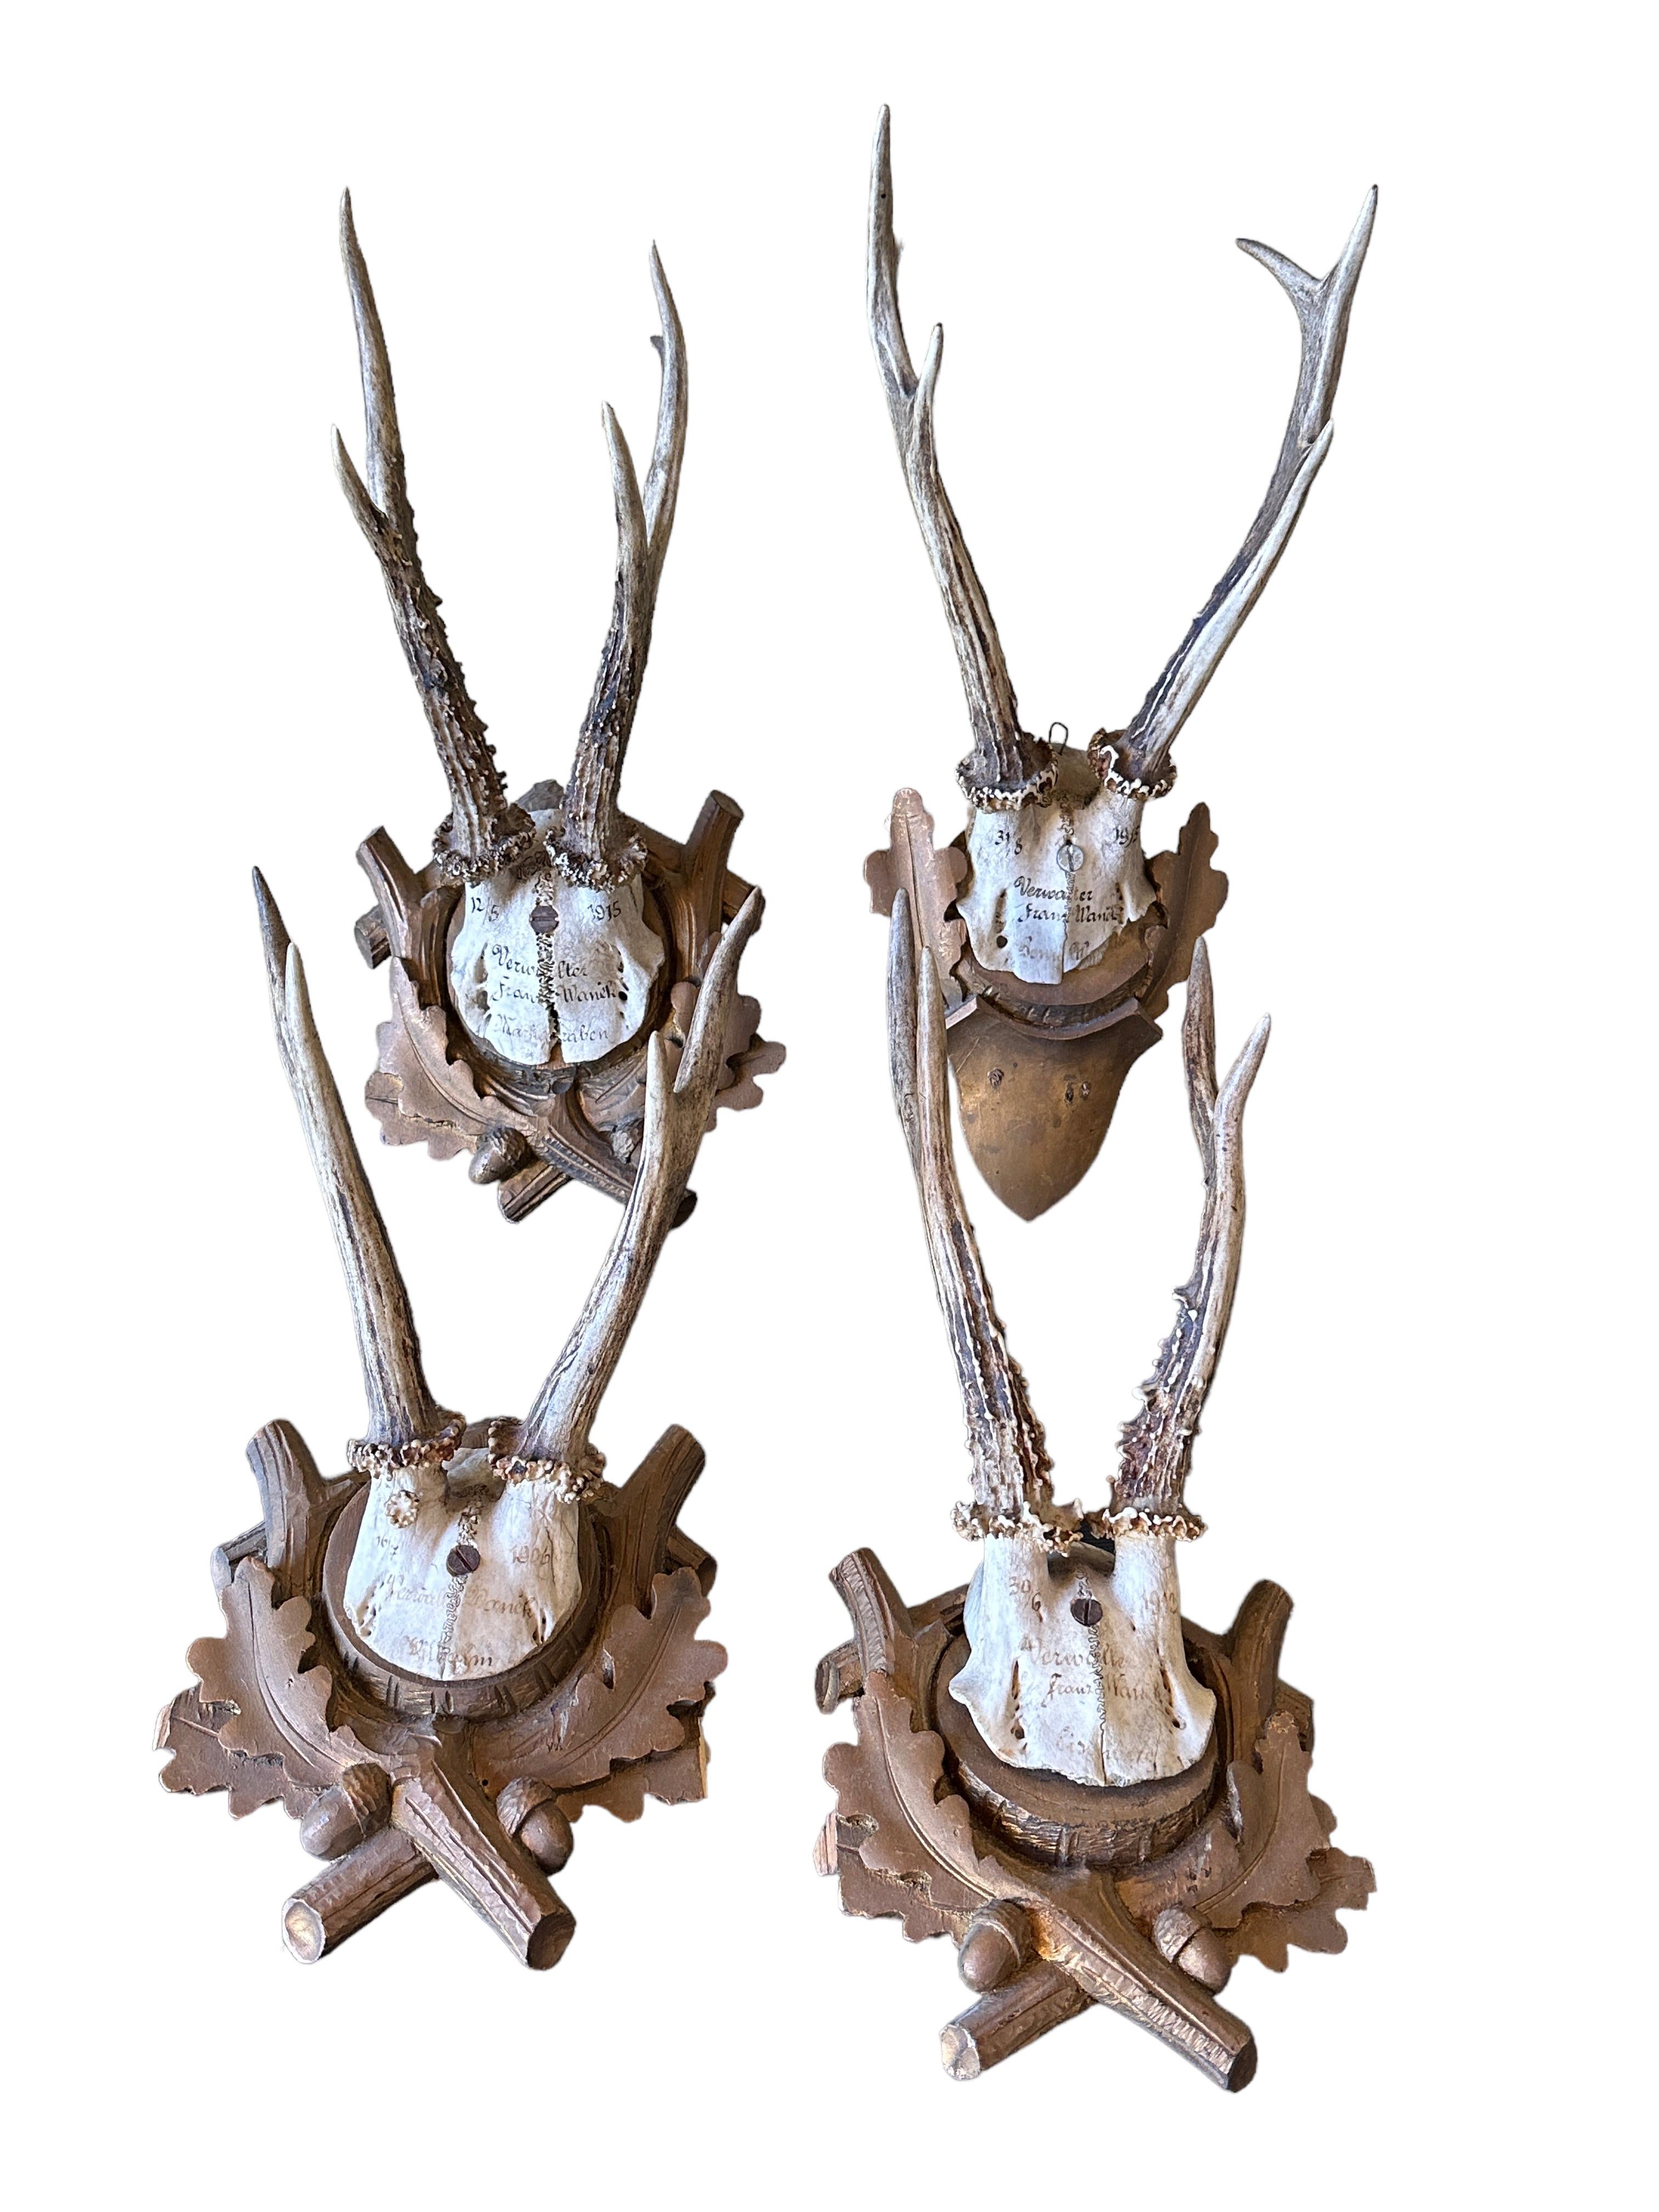 A set of four vintage Black Forest deer antler trophies on hand carved, Black Forest wooden plaques. All dated between 1906 - 1915. Measurement's given in dimensions section refers to the tallest item. A nice addition to your hunters loge, cabin,